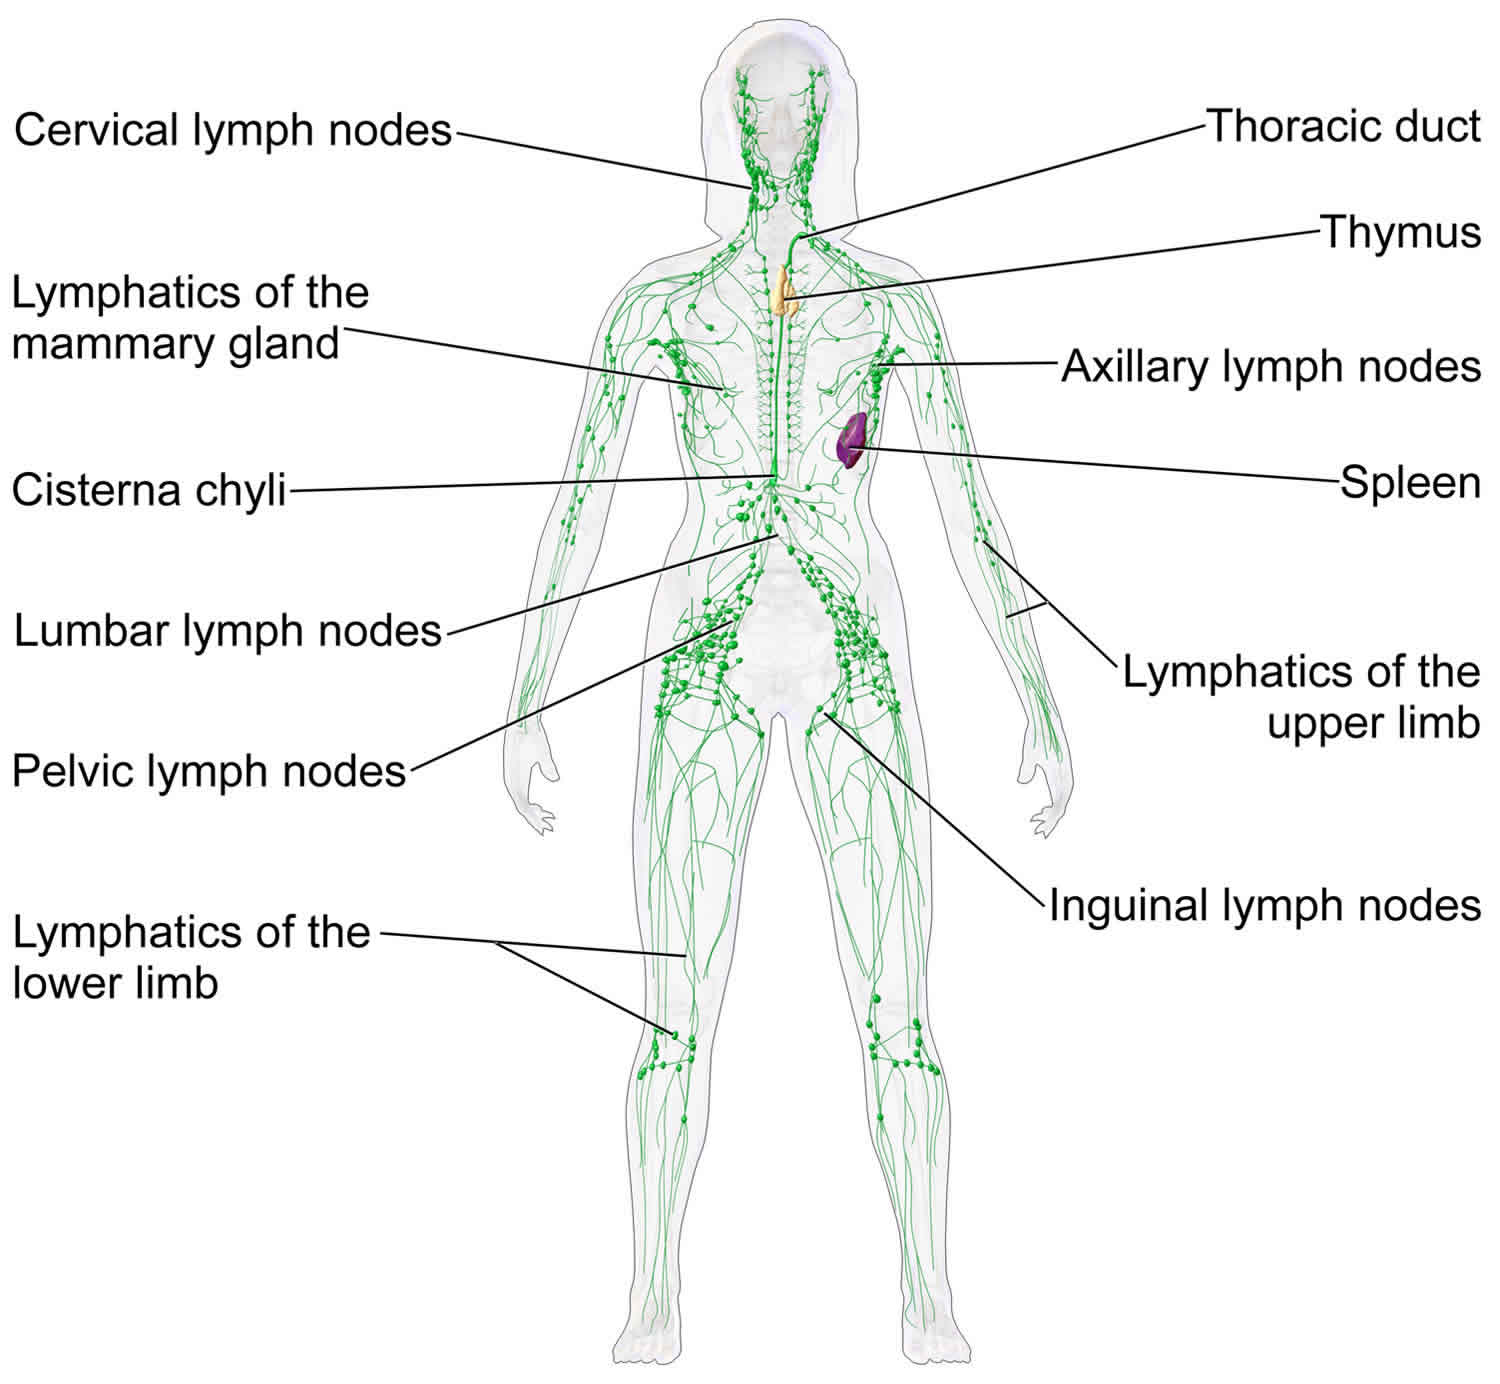 swollen supraclavicular lymph nodes due to infection